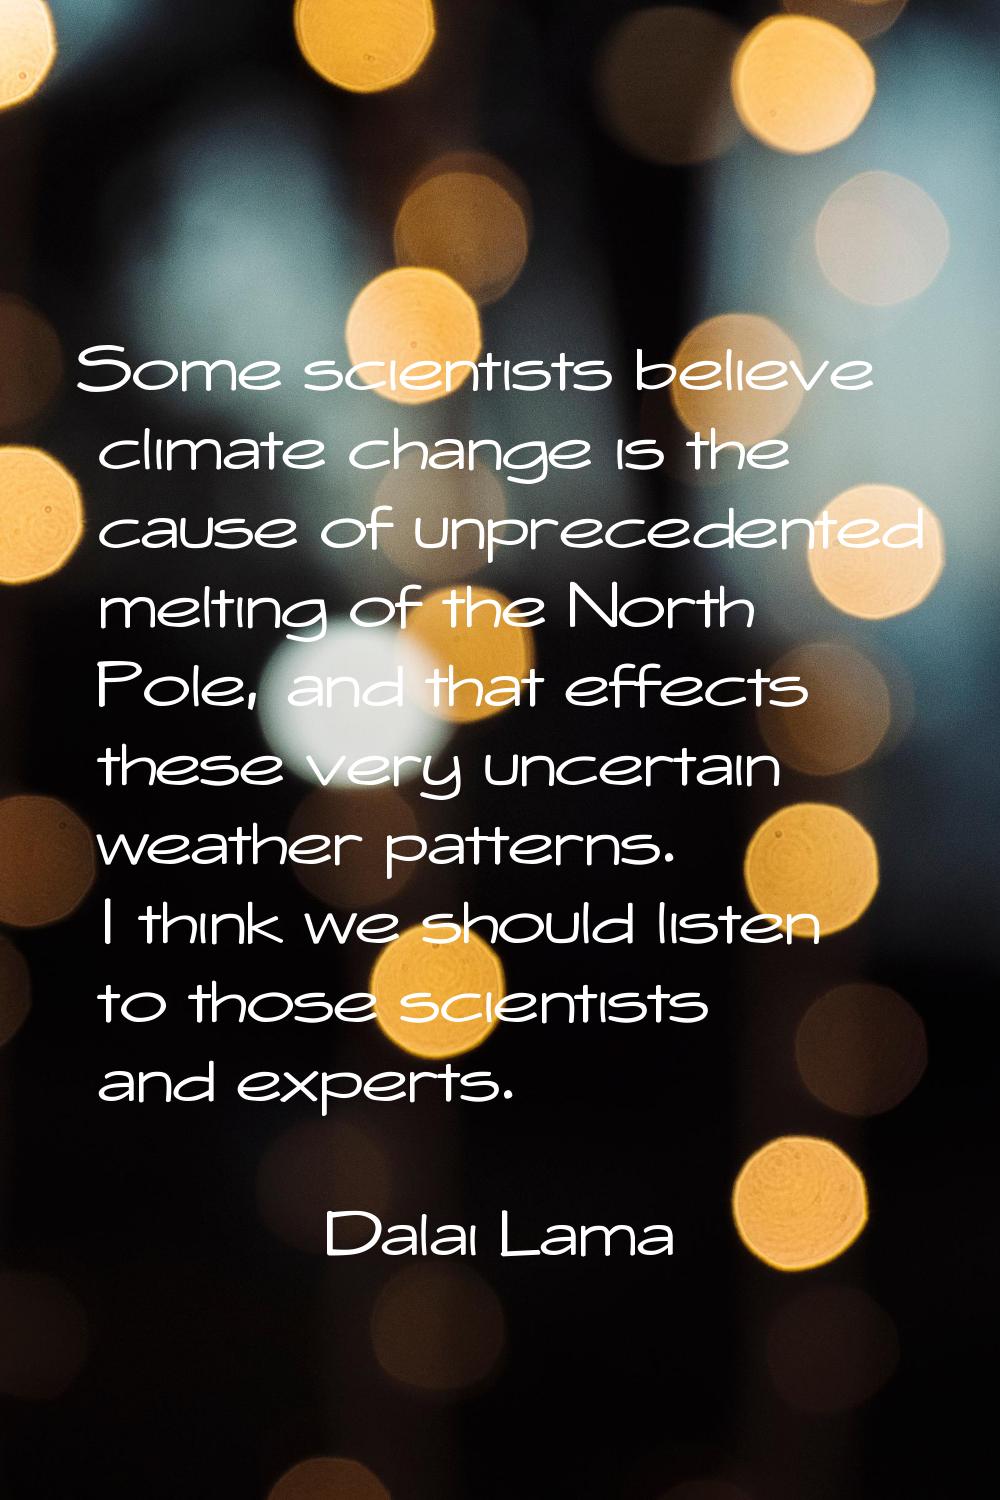 Some scientists believe climate change is the cause of unprecedented melting of the North Pole, and